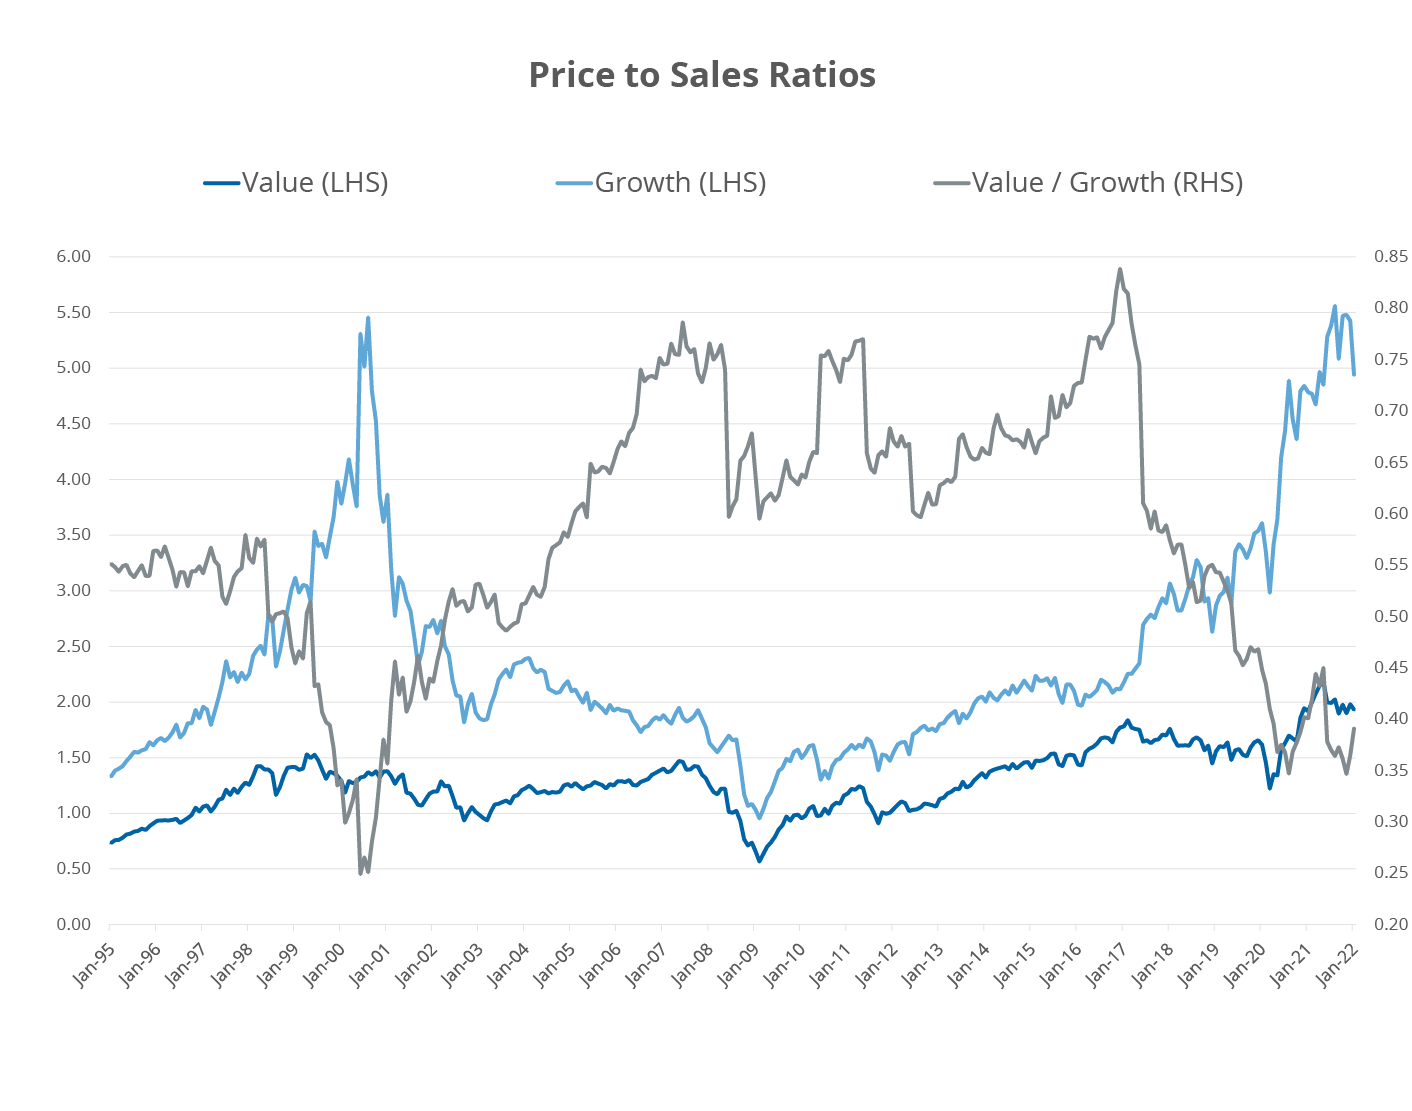 Value and growth stocks price to sales ratios from January 1995 to present